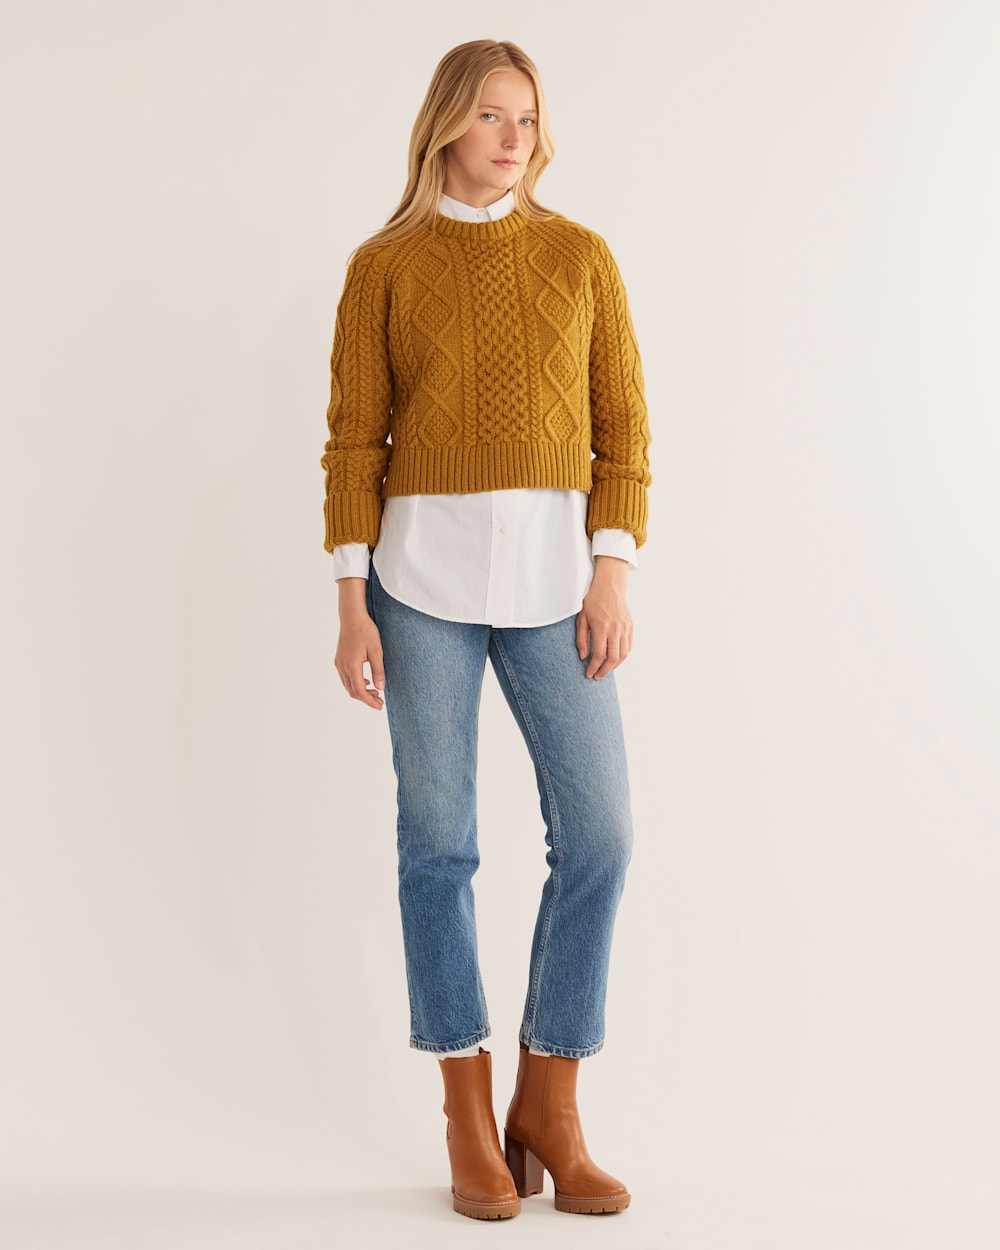 ALTERNATE VIEW OF WOMEN�S SHETLAND COLLECTION FISHERMAN SWEATER IN DEEP GOLD image number 5